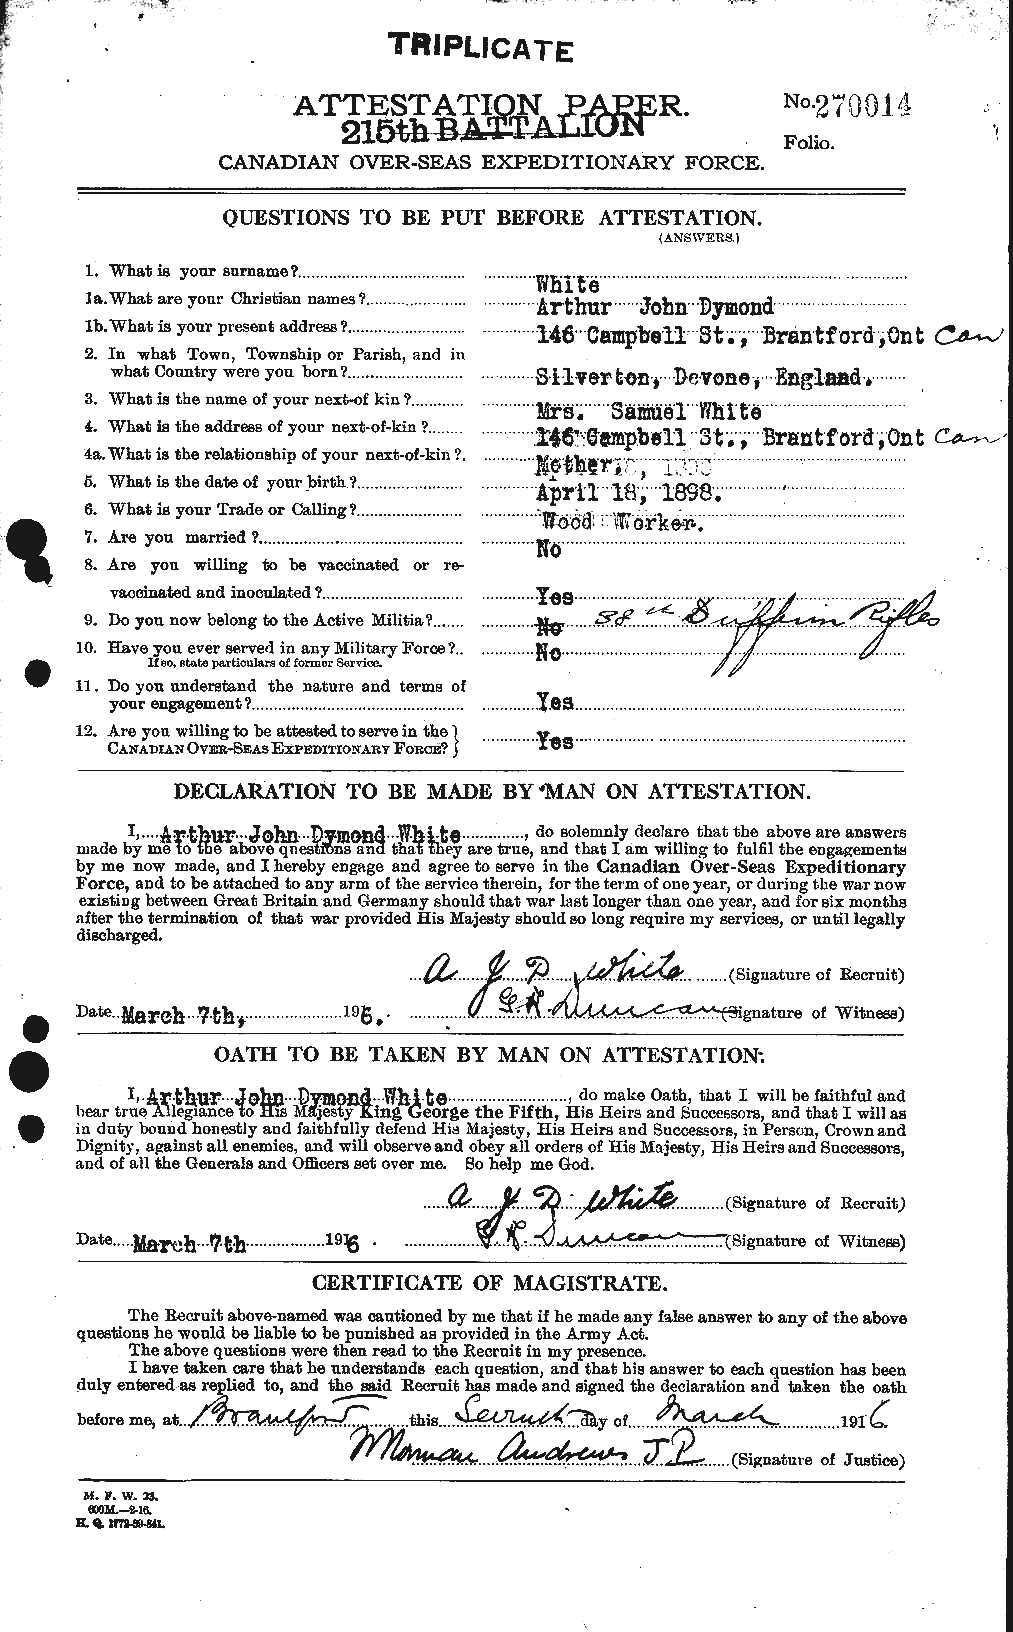 Personnel Records of the First World War - CEF 669849a